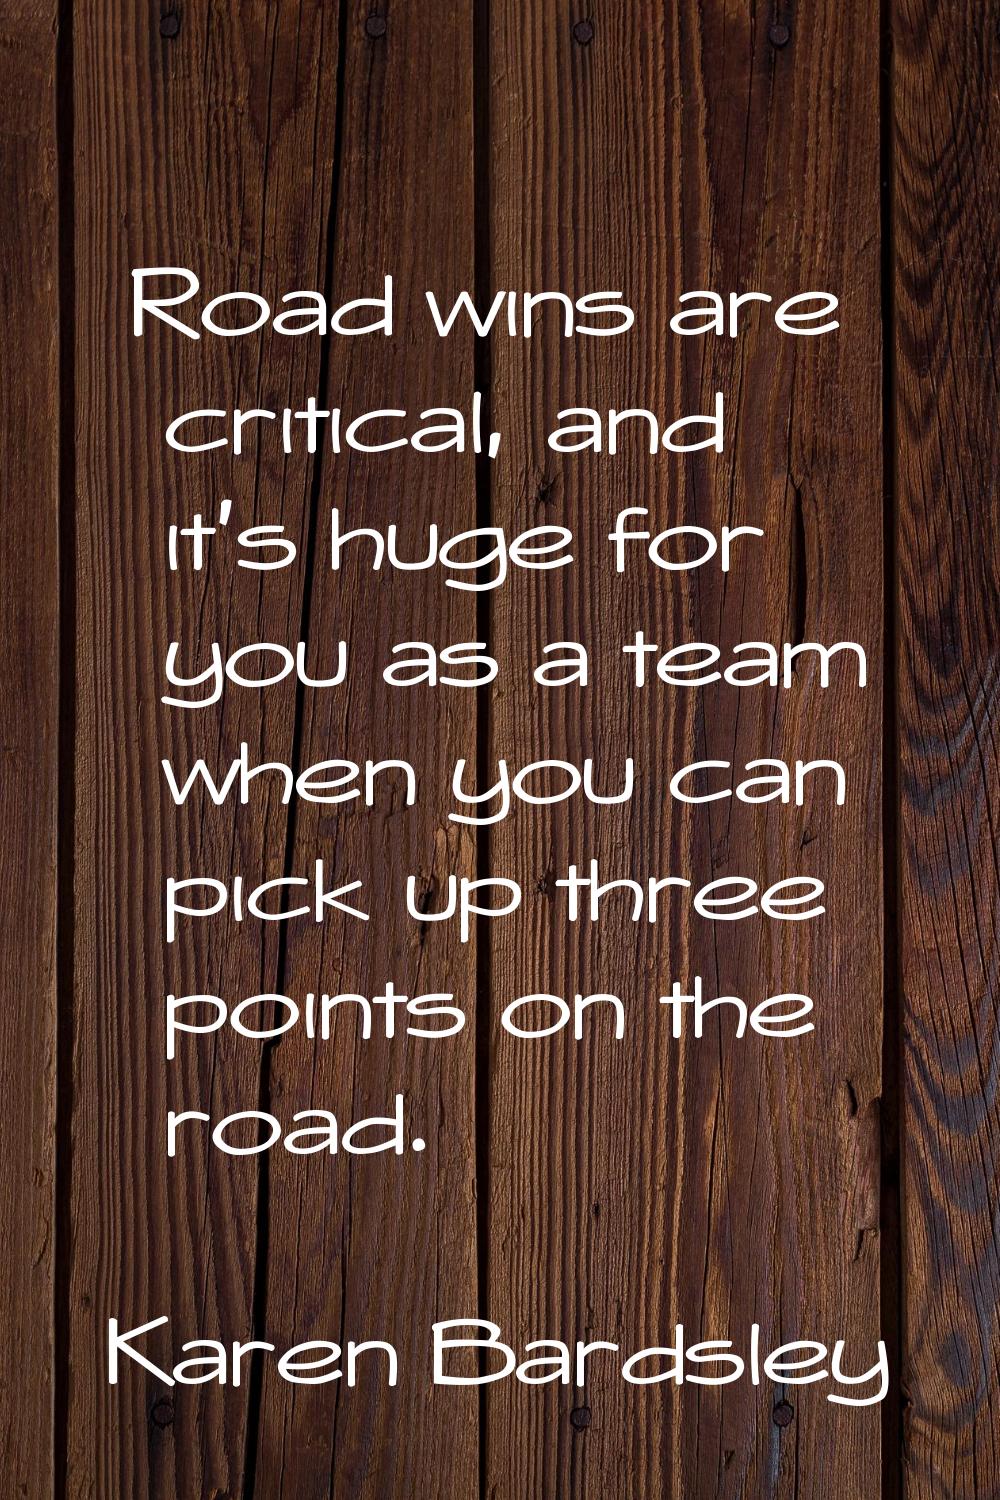 Road wins are critical, and it's huge for you as a team when you can pick up three points on the ro